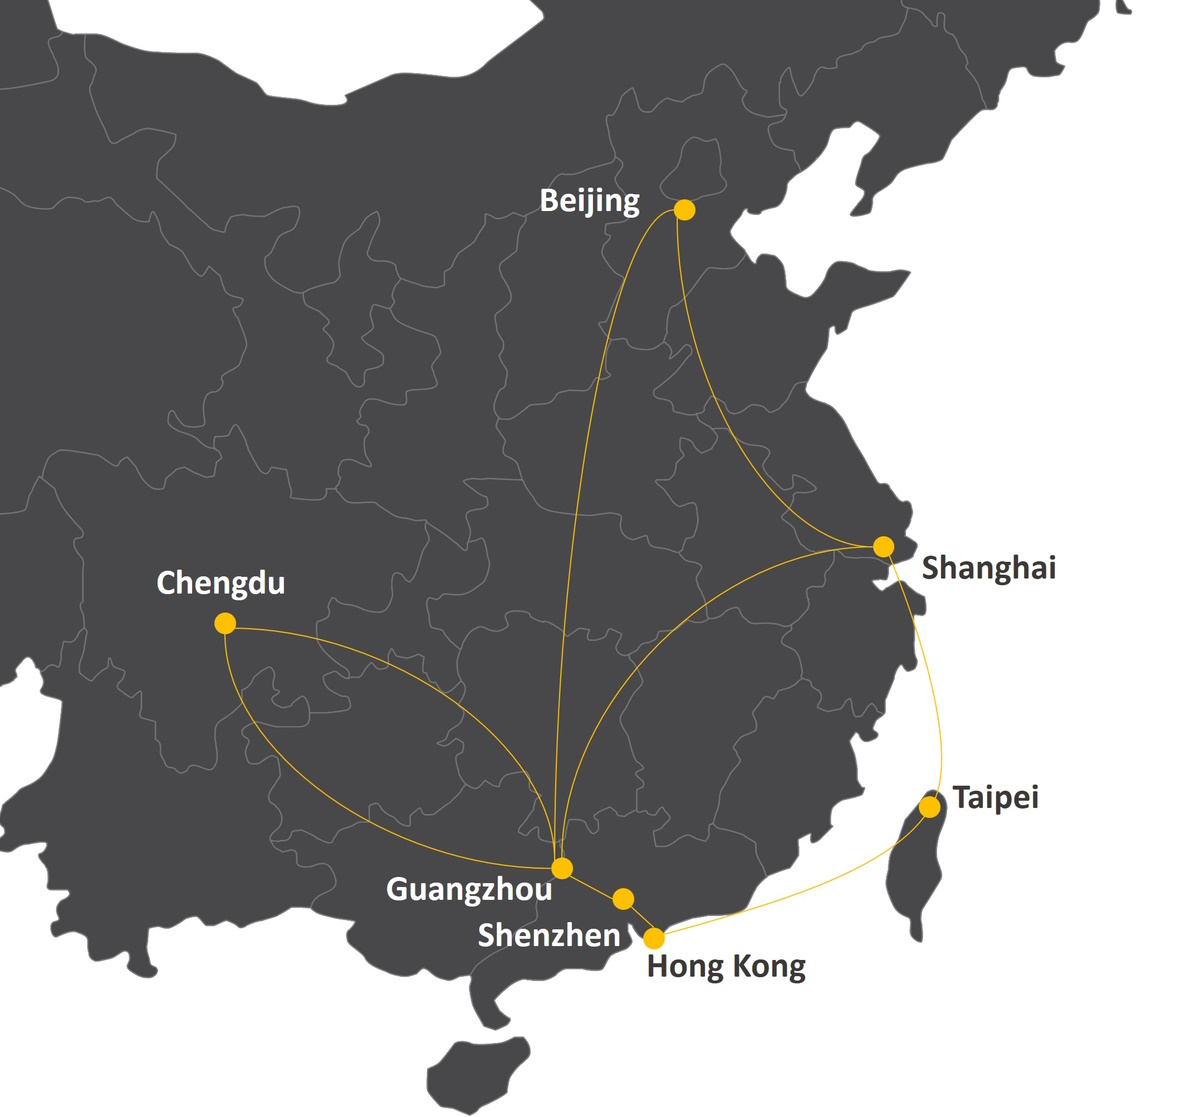 Network Access across Greater China Region